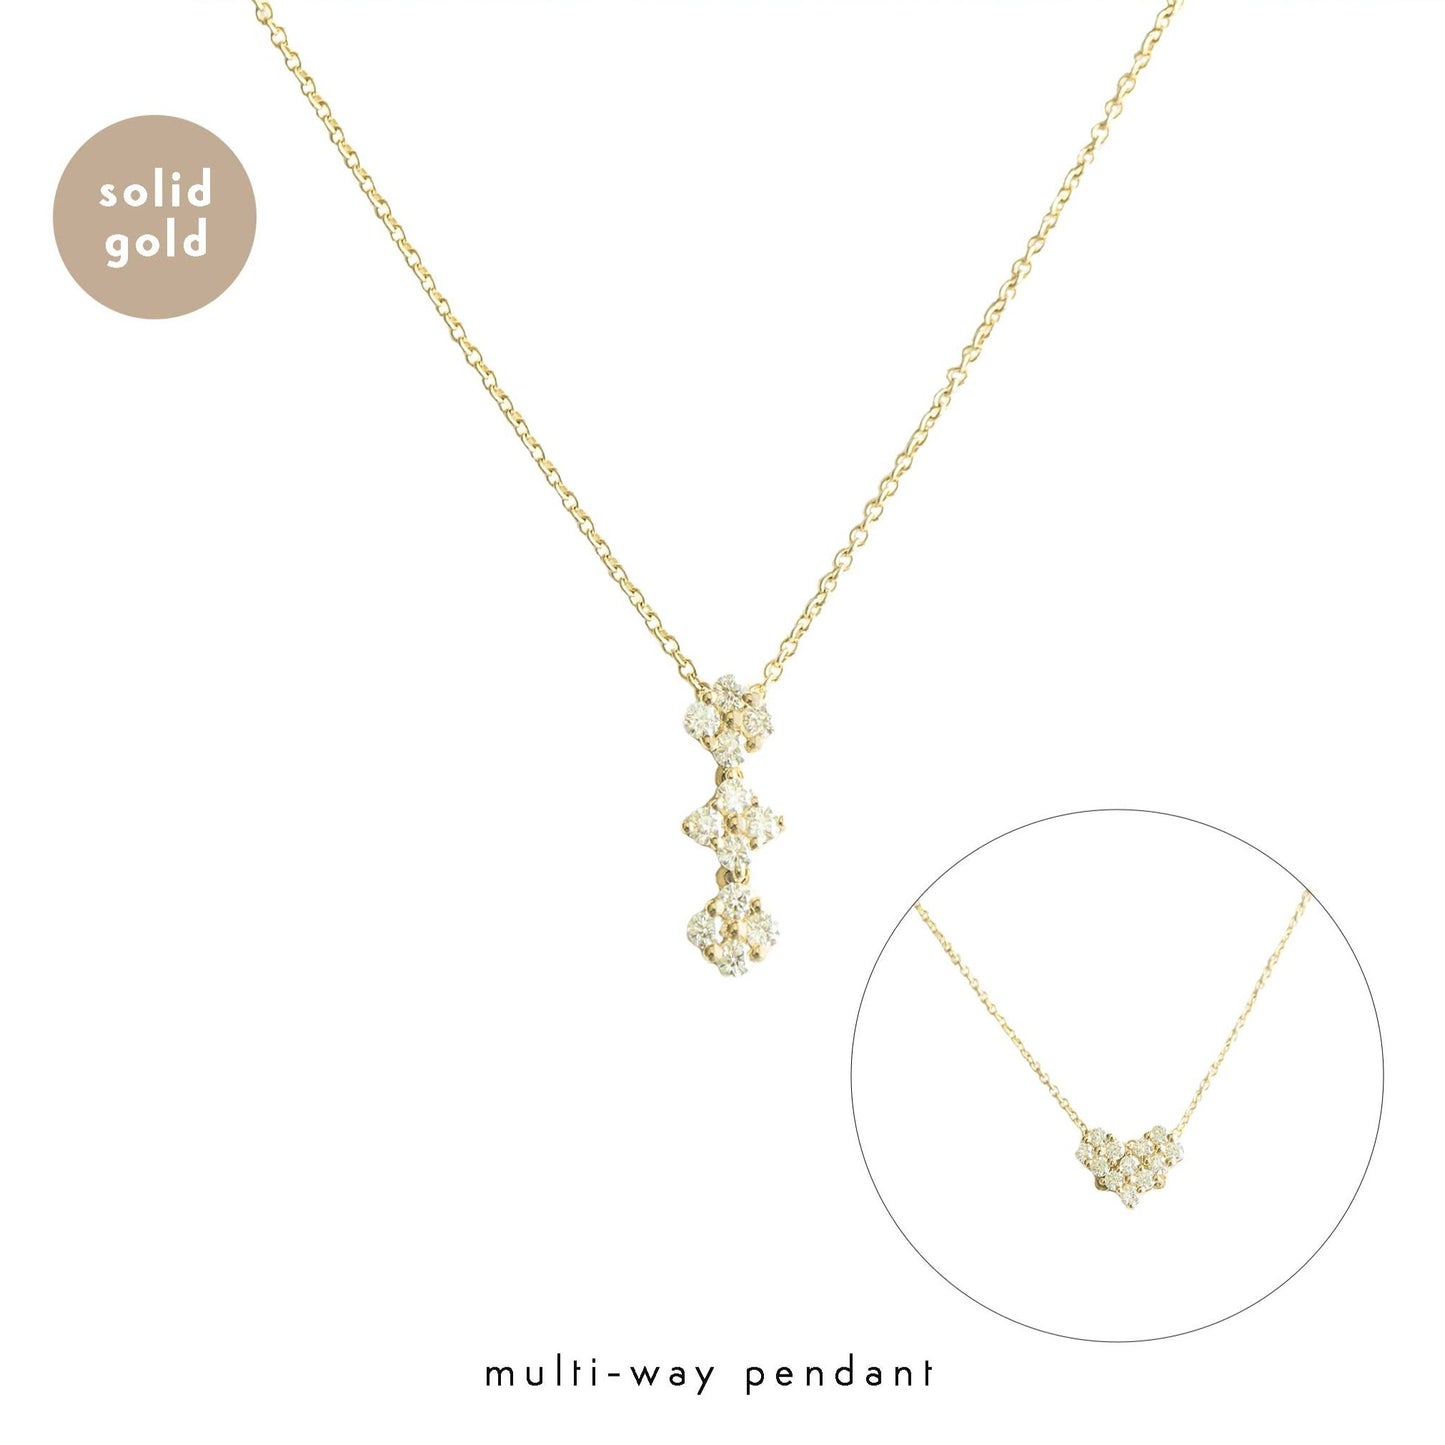 Solid Yellow Gold Tri Clover Moissanite Necklace